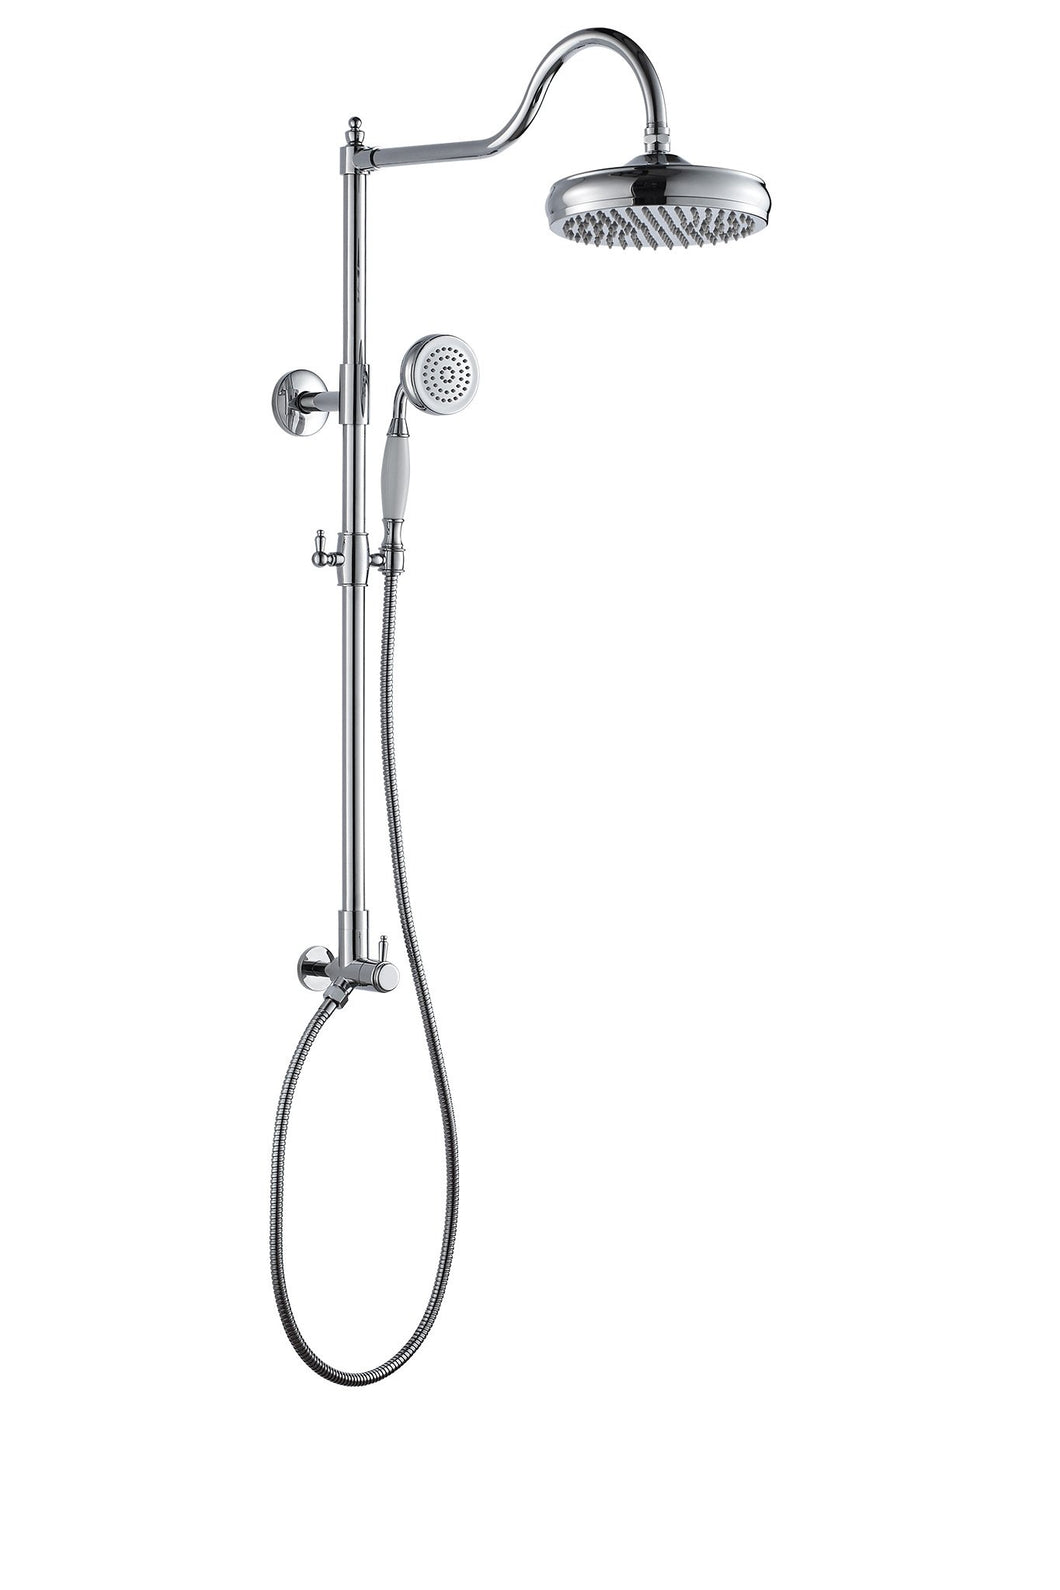 Combine Polaris Vintage rain shower set it in your nostalgia-laden rustic bathroom for that old-world charm and get traditional style with modern amenity.